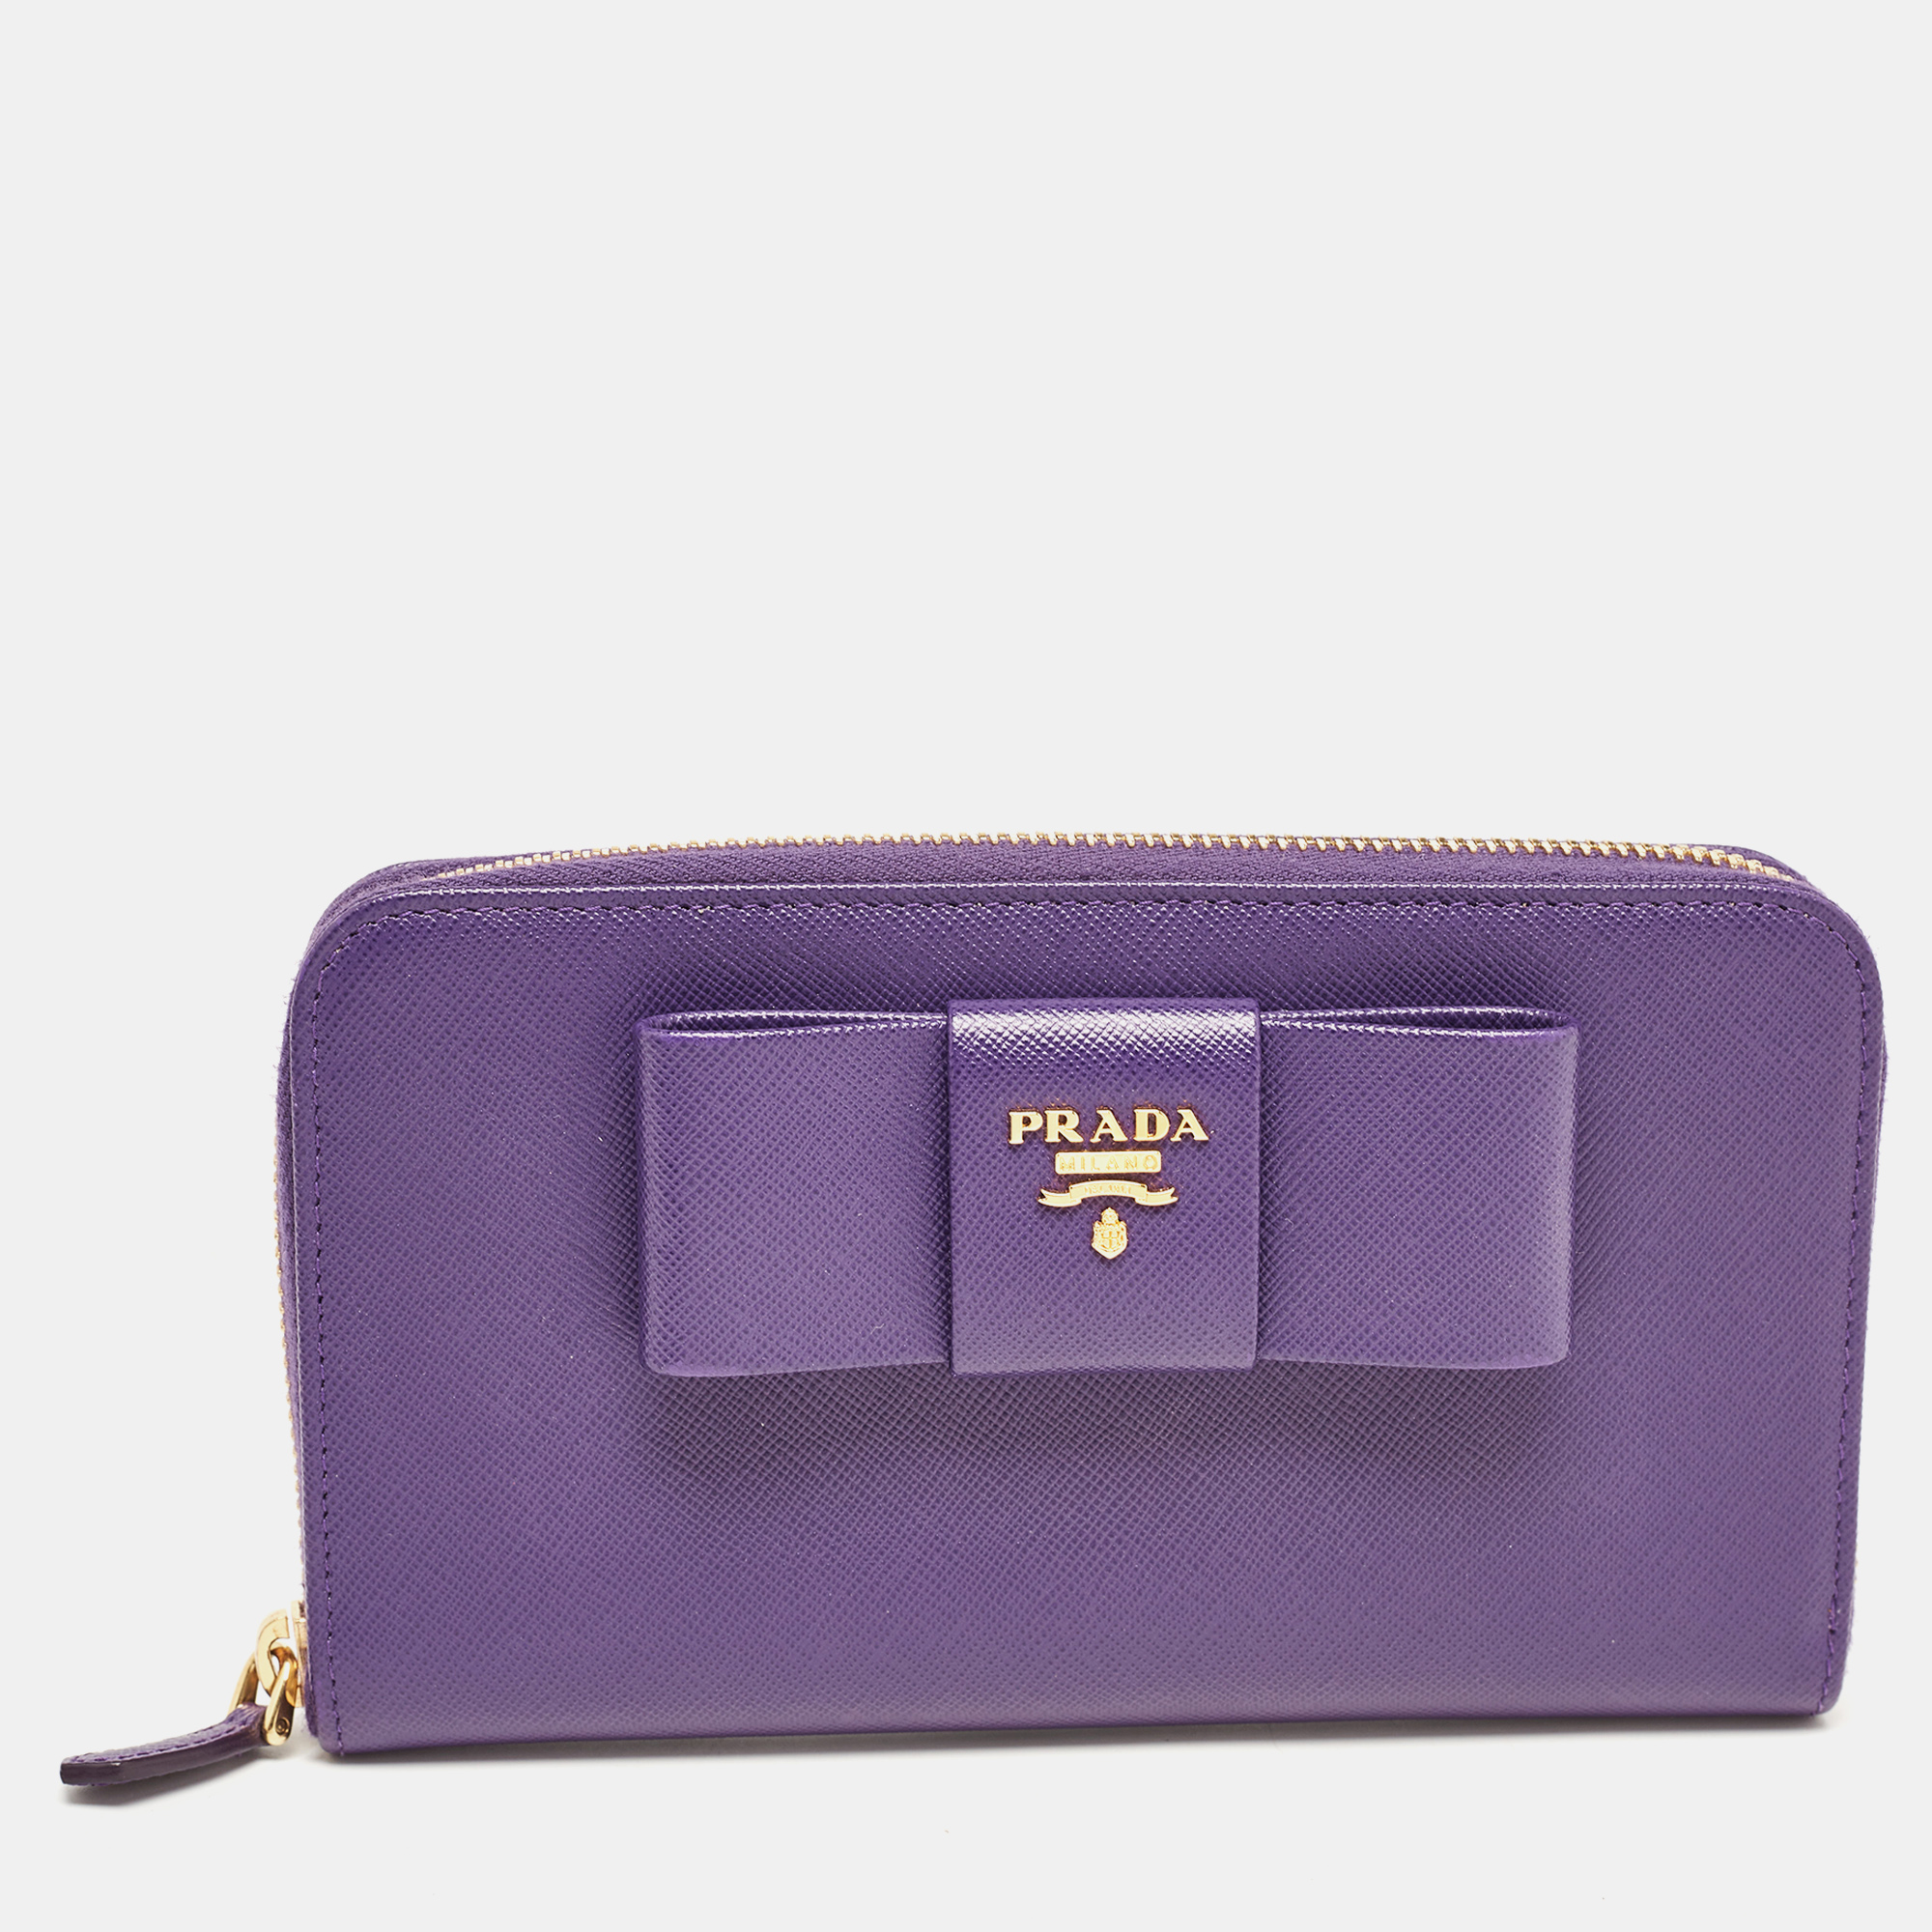 Pre-owned Prada Purple Saffiano Leather Bow Zip Around Wallet